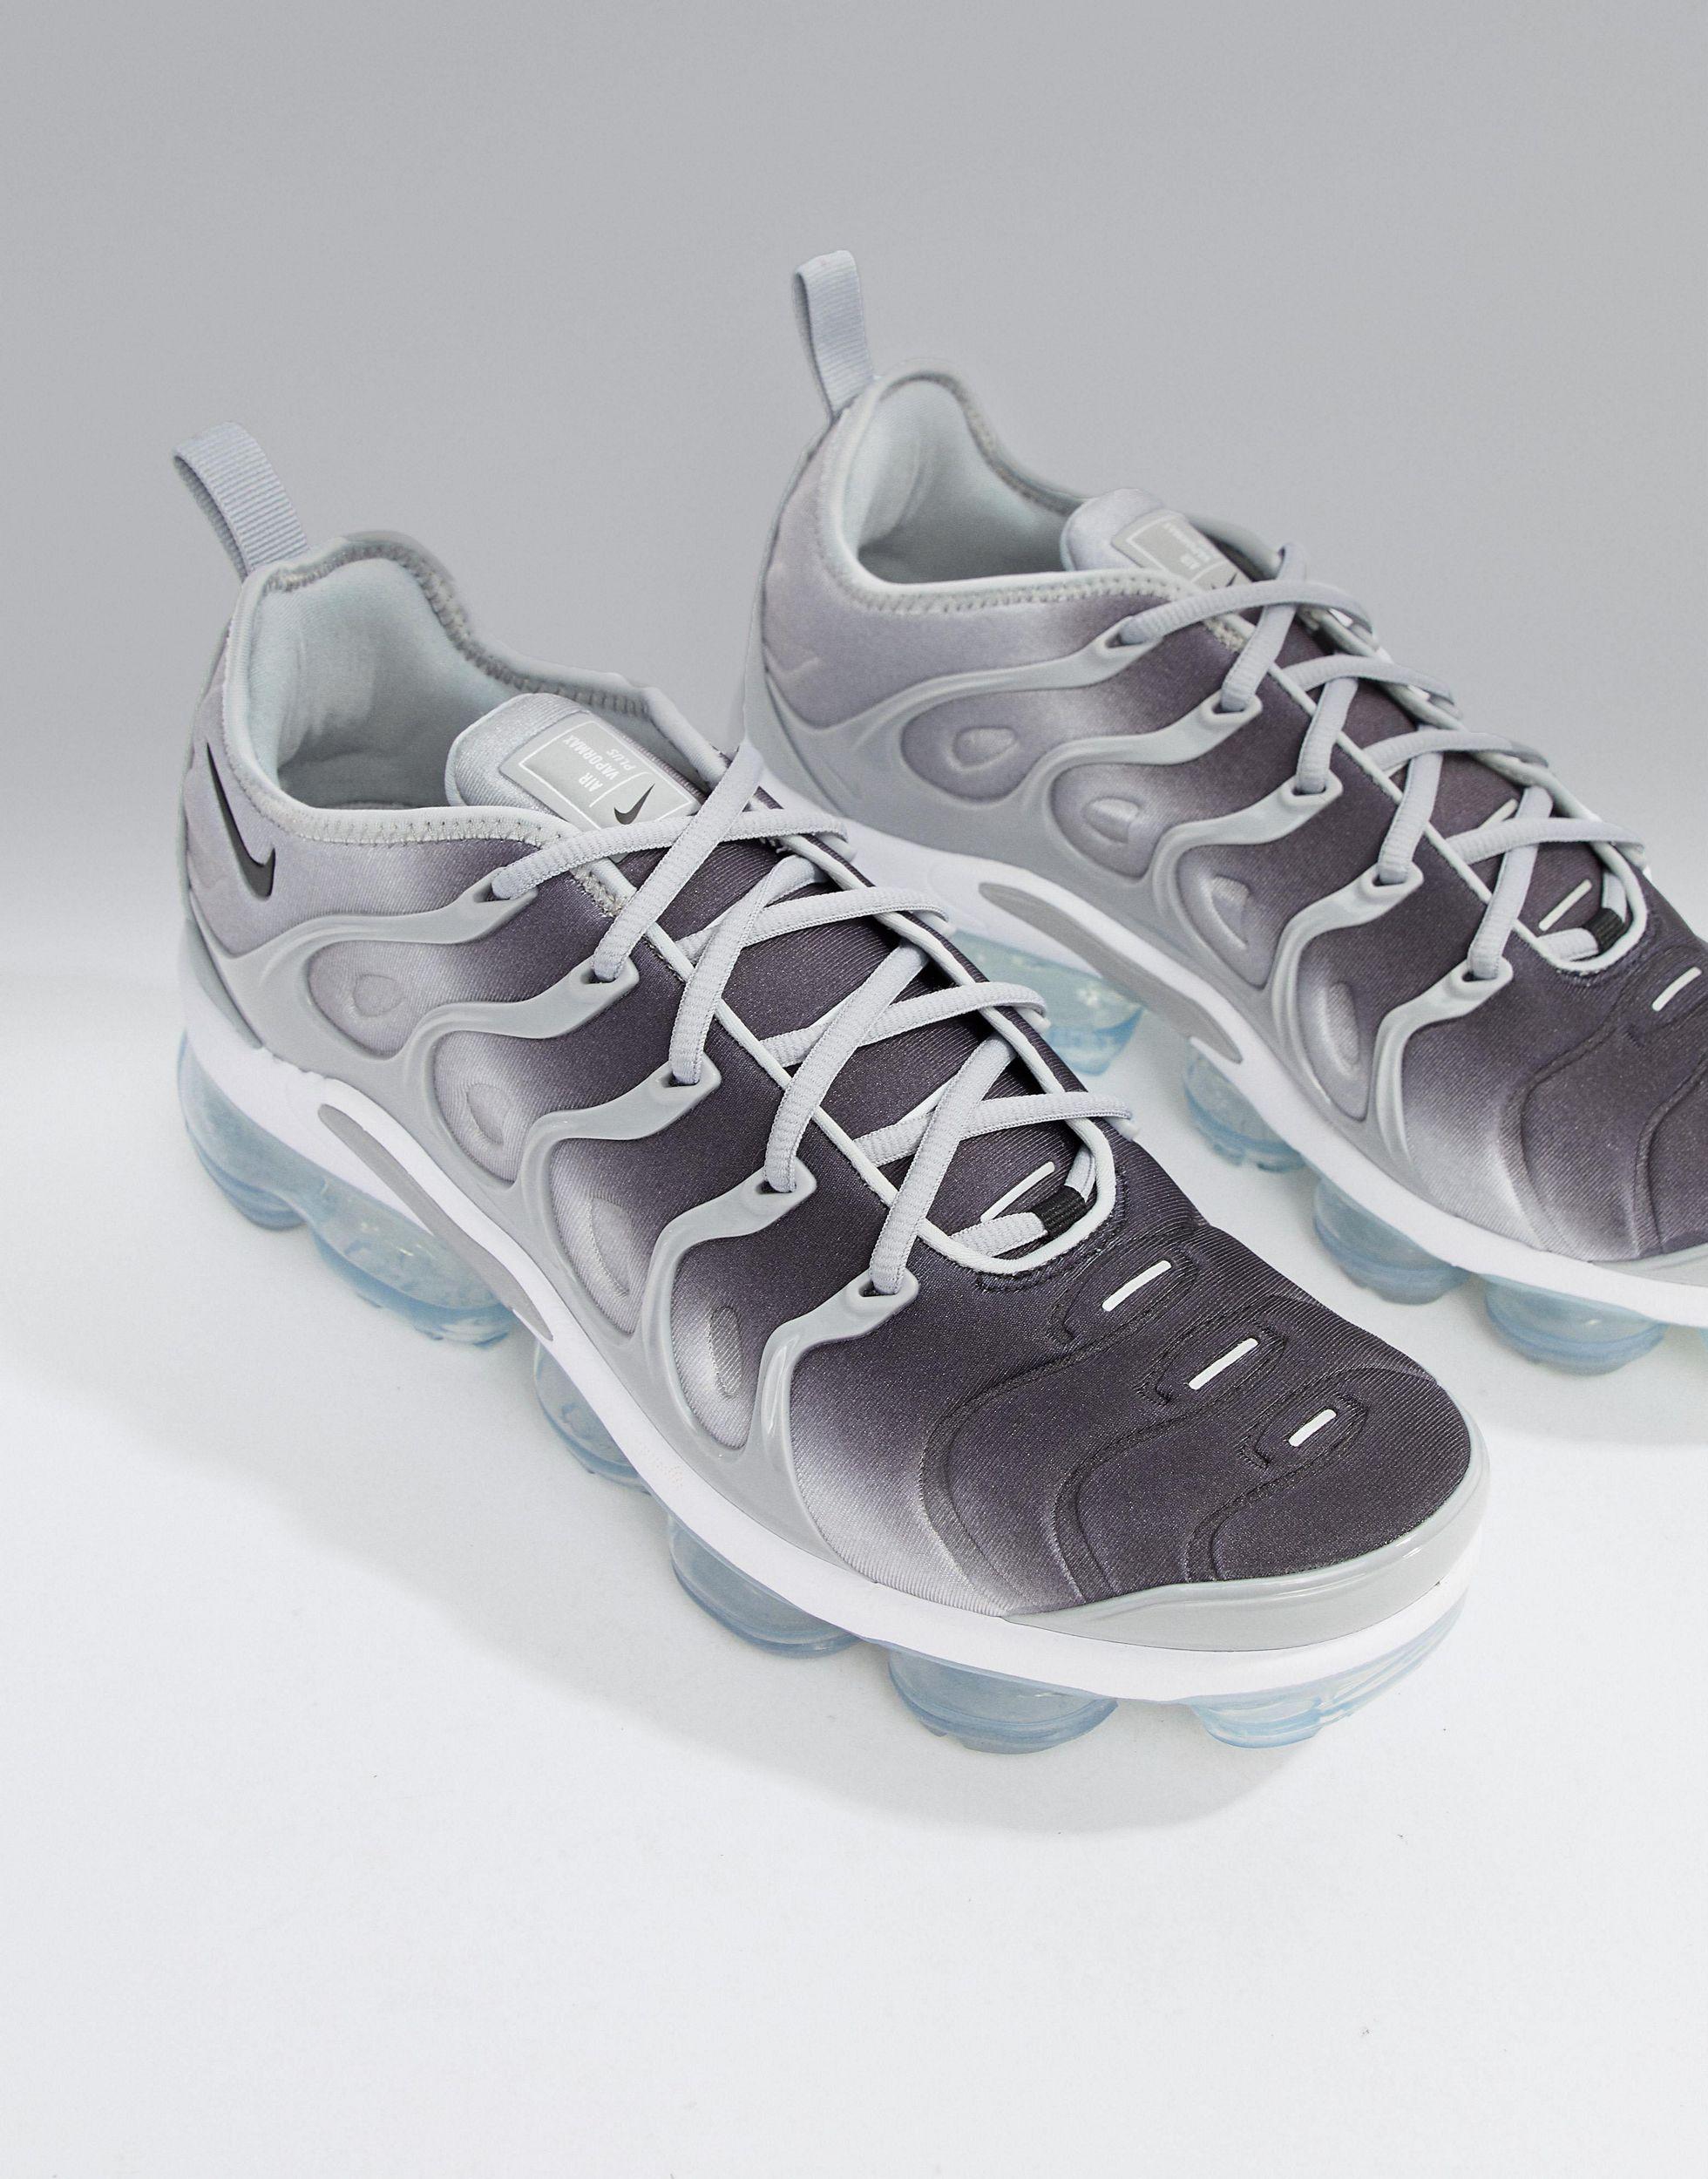 Nike Synthetic Air Vapormax Plus in 